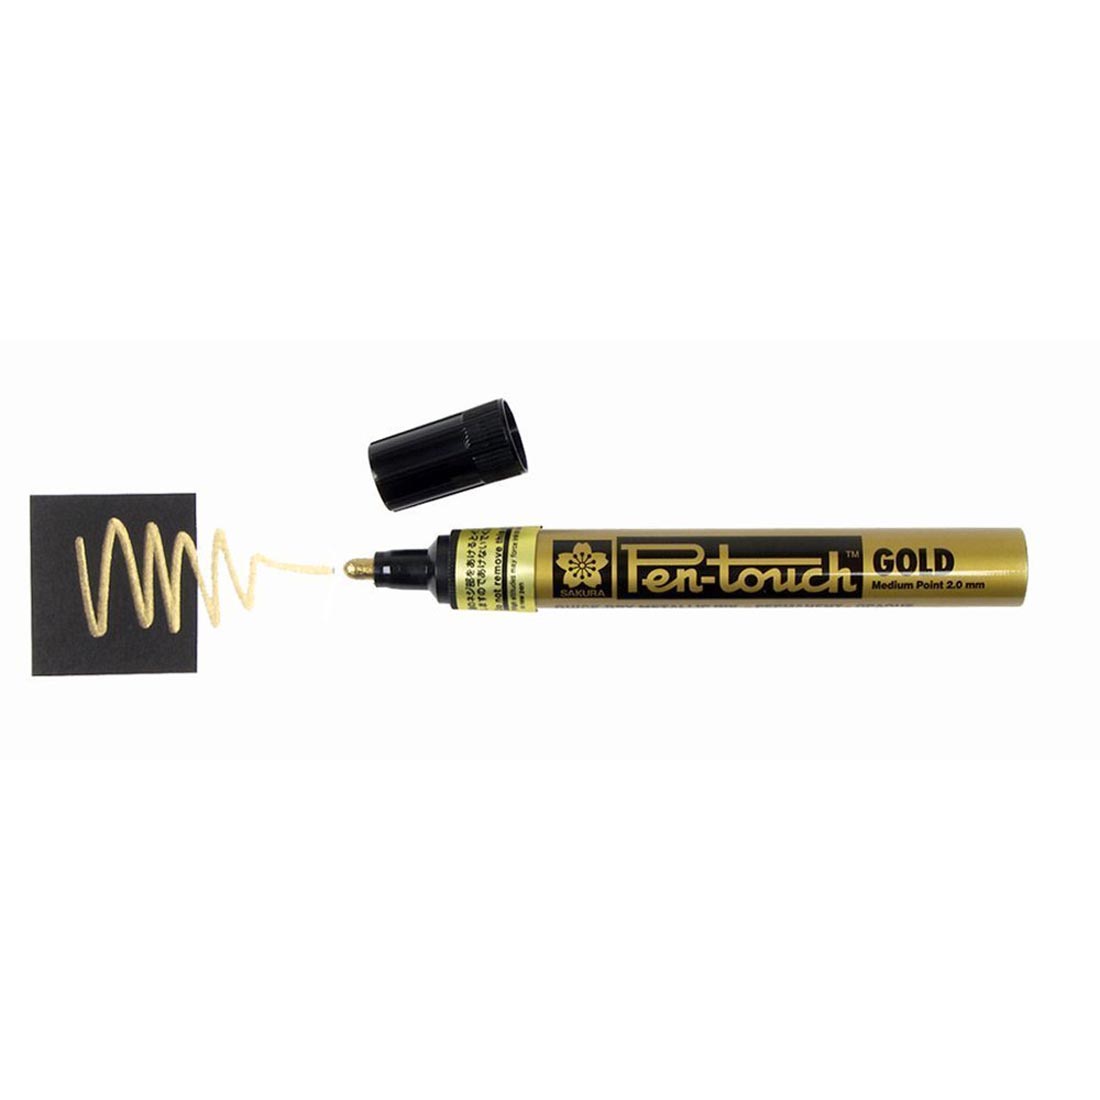 Sakura Pen-Touch Opaque Marker Medium Point Metallic Gold with cap off and sample scribble line drawn